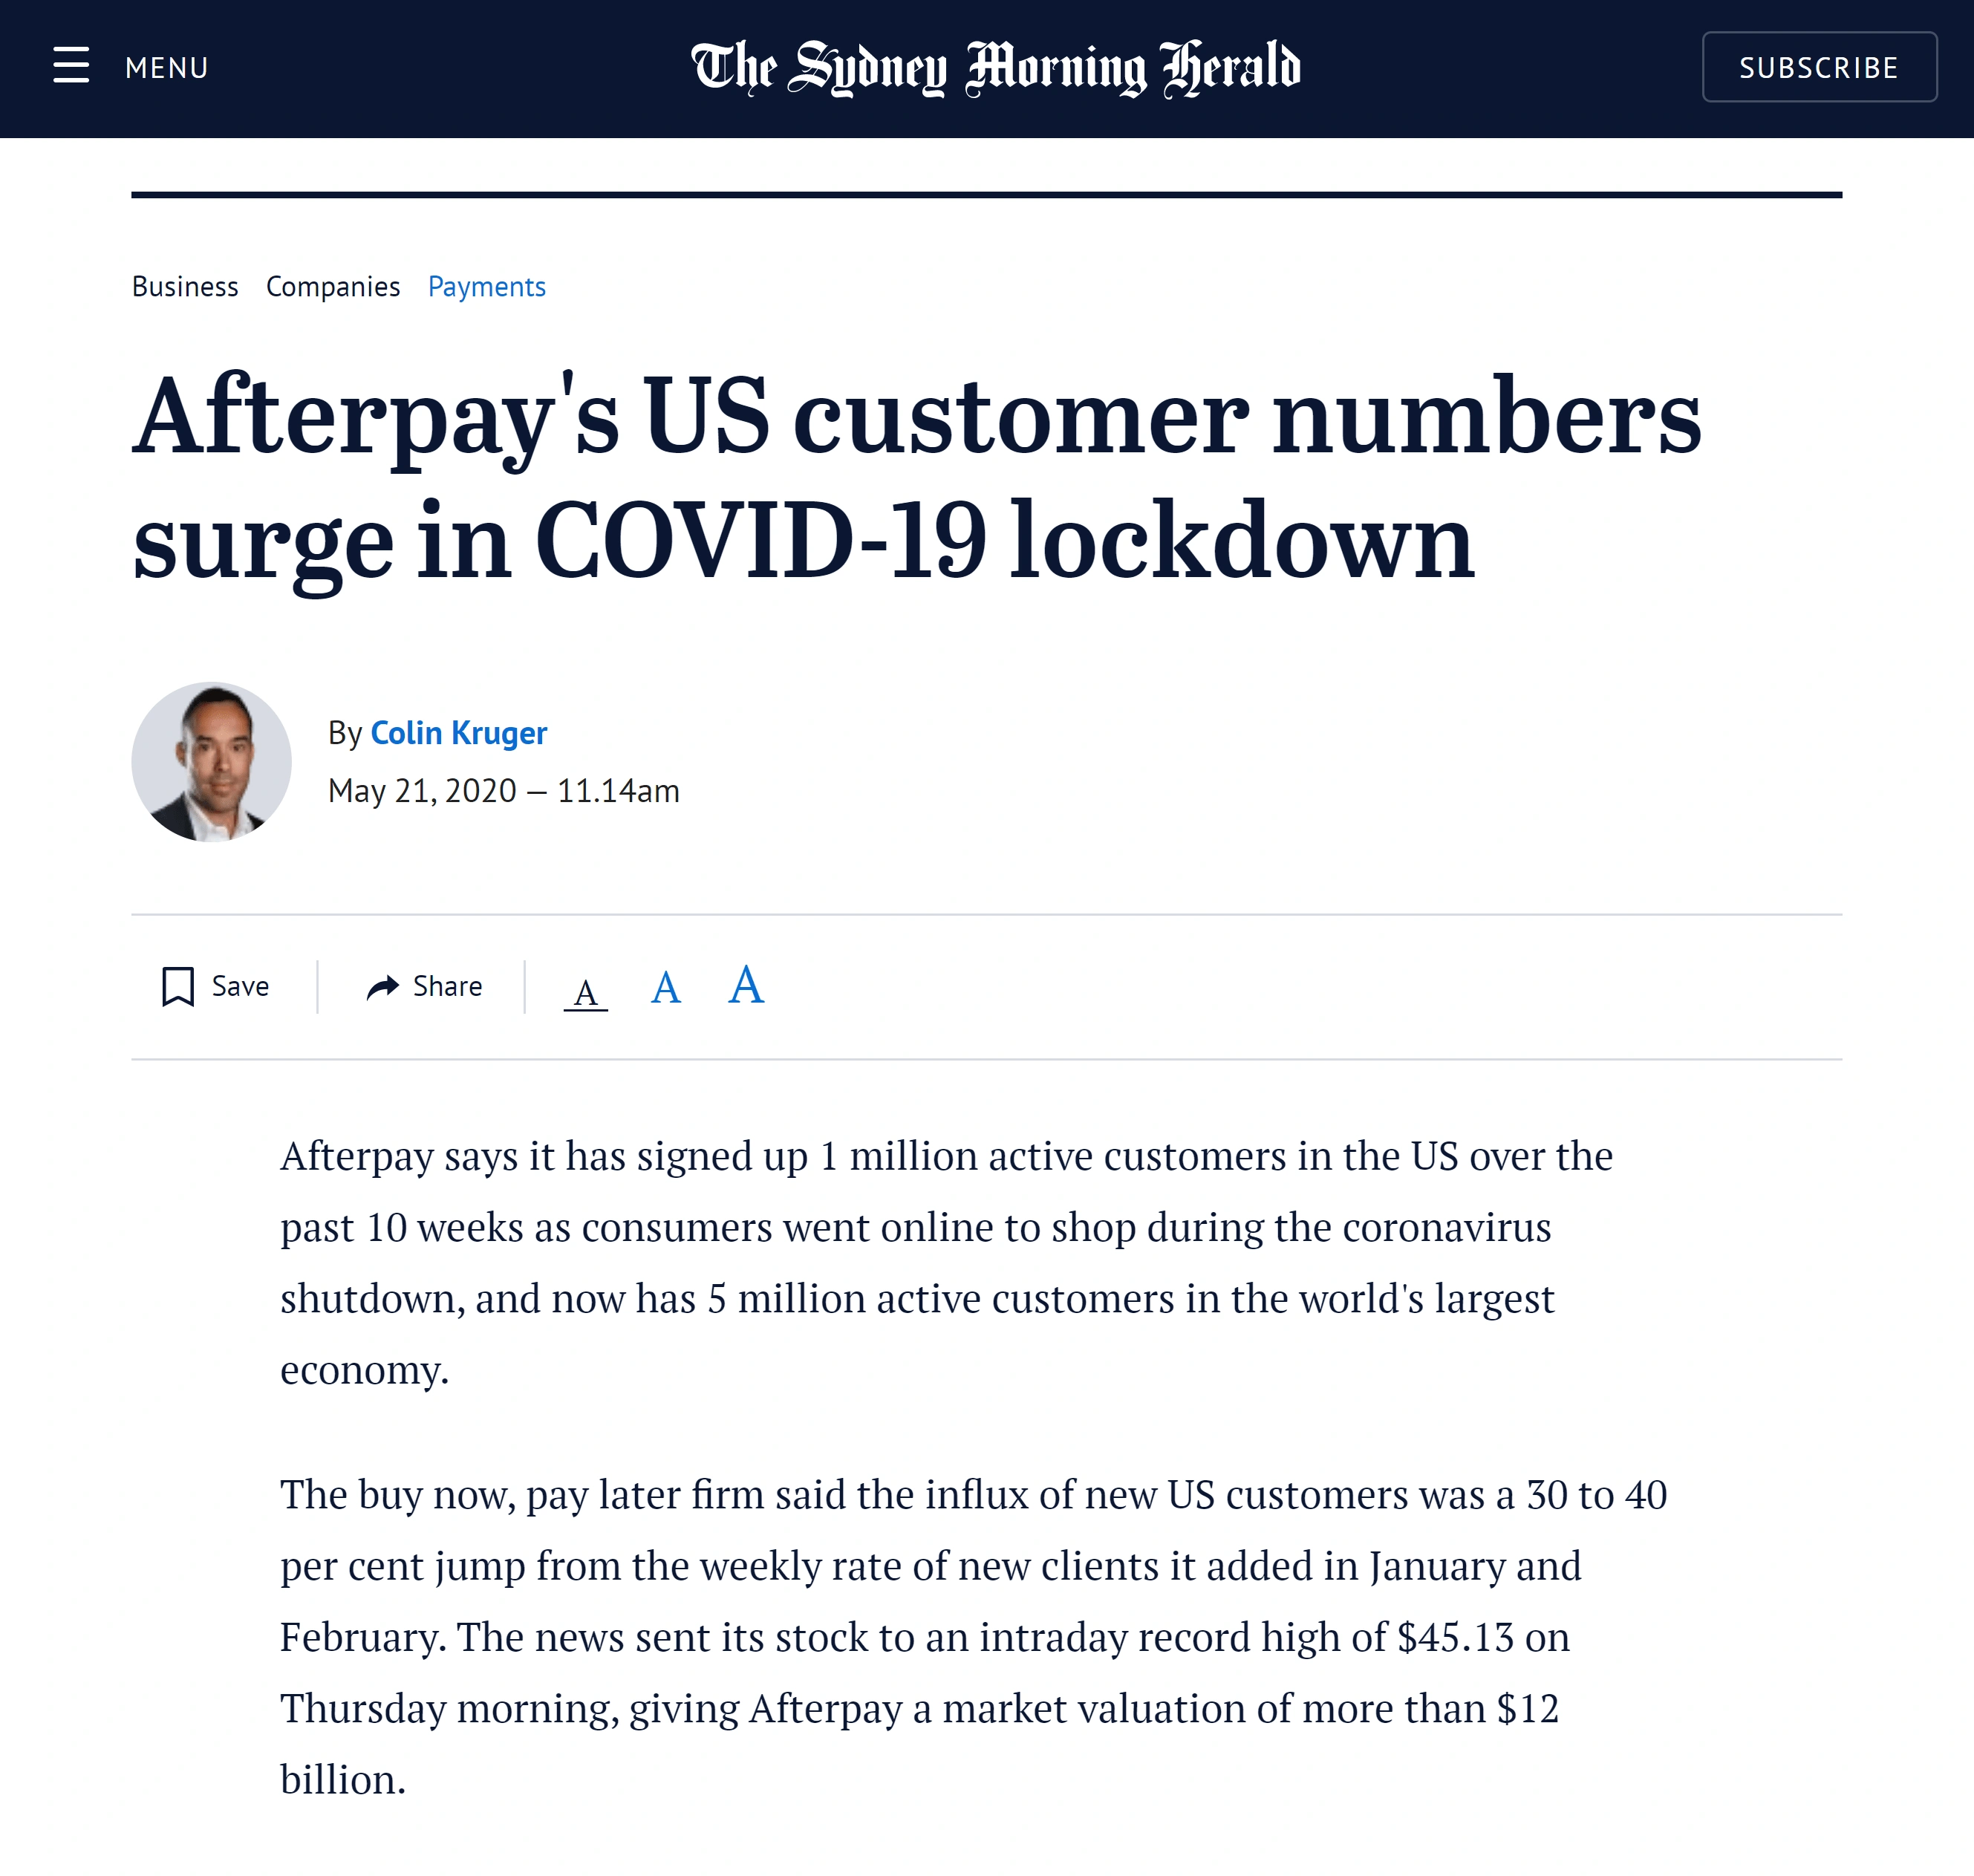 afterpay-surge-in-covid-19-lockdown-m...